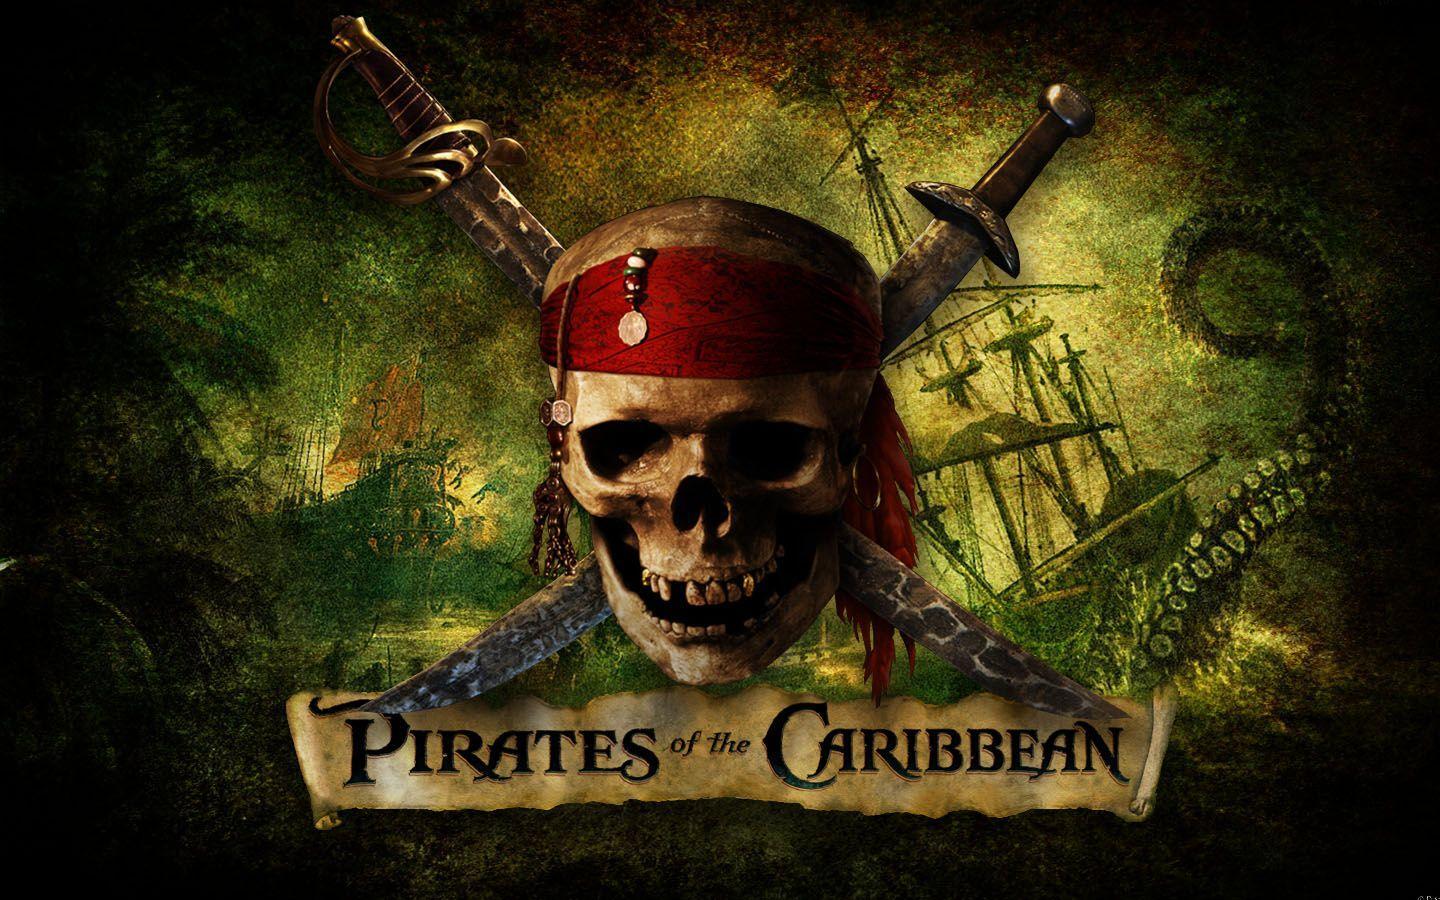 ‘Pirates of the Caribbean 6’ Rumored to be “In the Works” at Disney